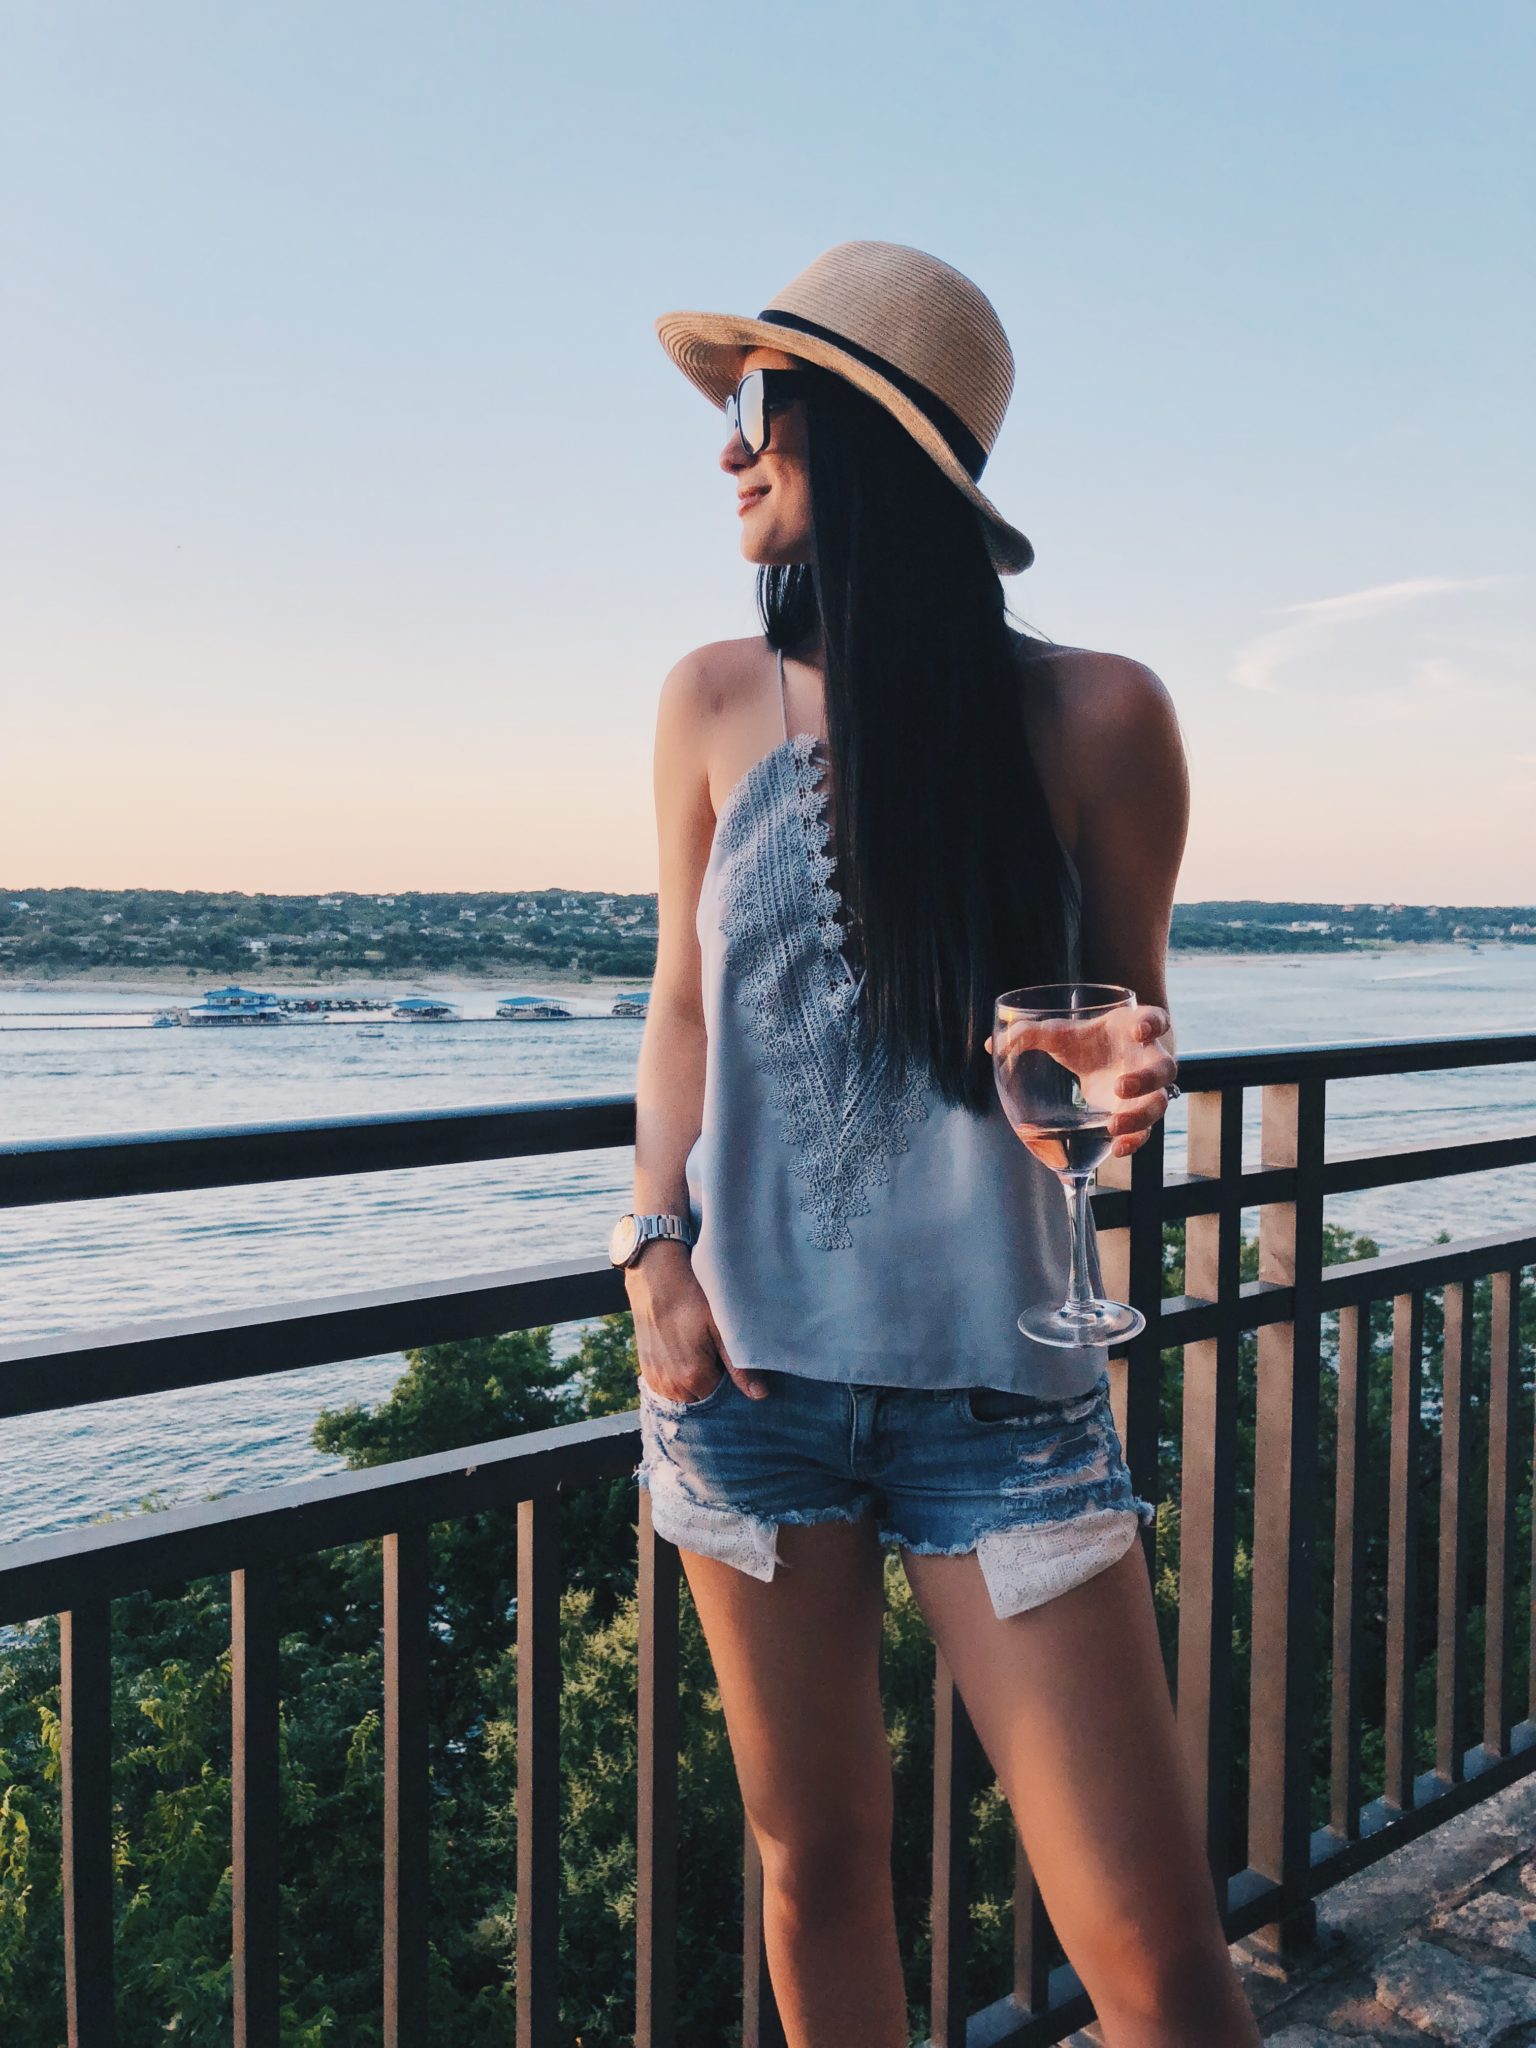 DTKAustin shares where the best vacation and staycation spot near Austin is; the Lakeway Resort & Spa. | Austin travel tips | staycation ideas near Austin Texas | Austin travel ideas | where to stay near Austin Texas || DTK Austin #austintexas #austintravel #lakewayresort #texastravel #staycation - {Best Staycation Near Austin - Lakeway Resort & Spa} by popular Austin blogger, Dressed to Kill